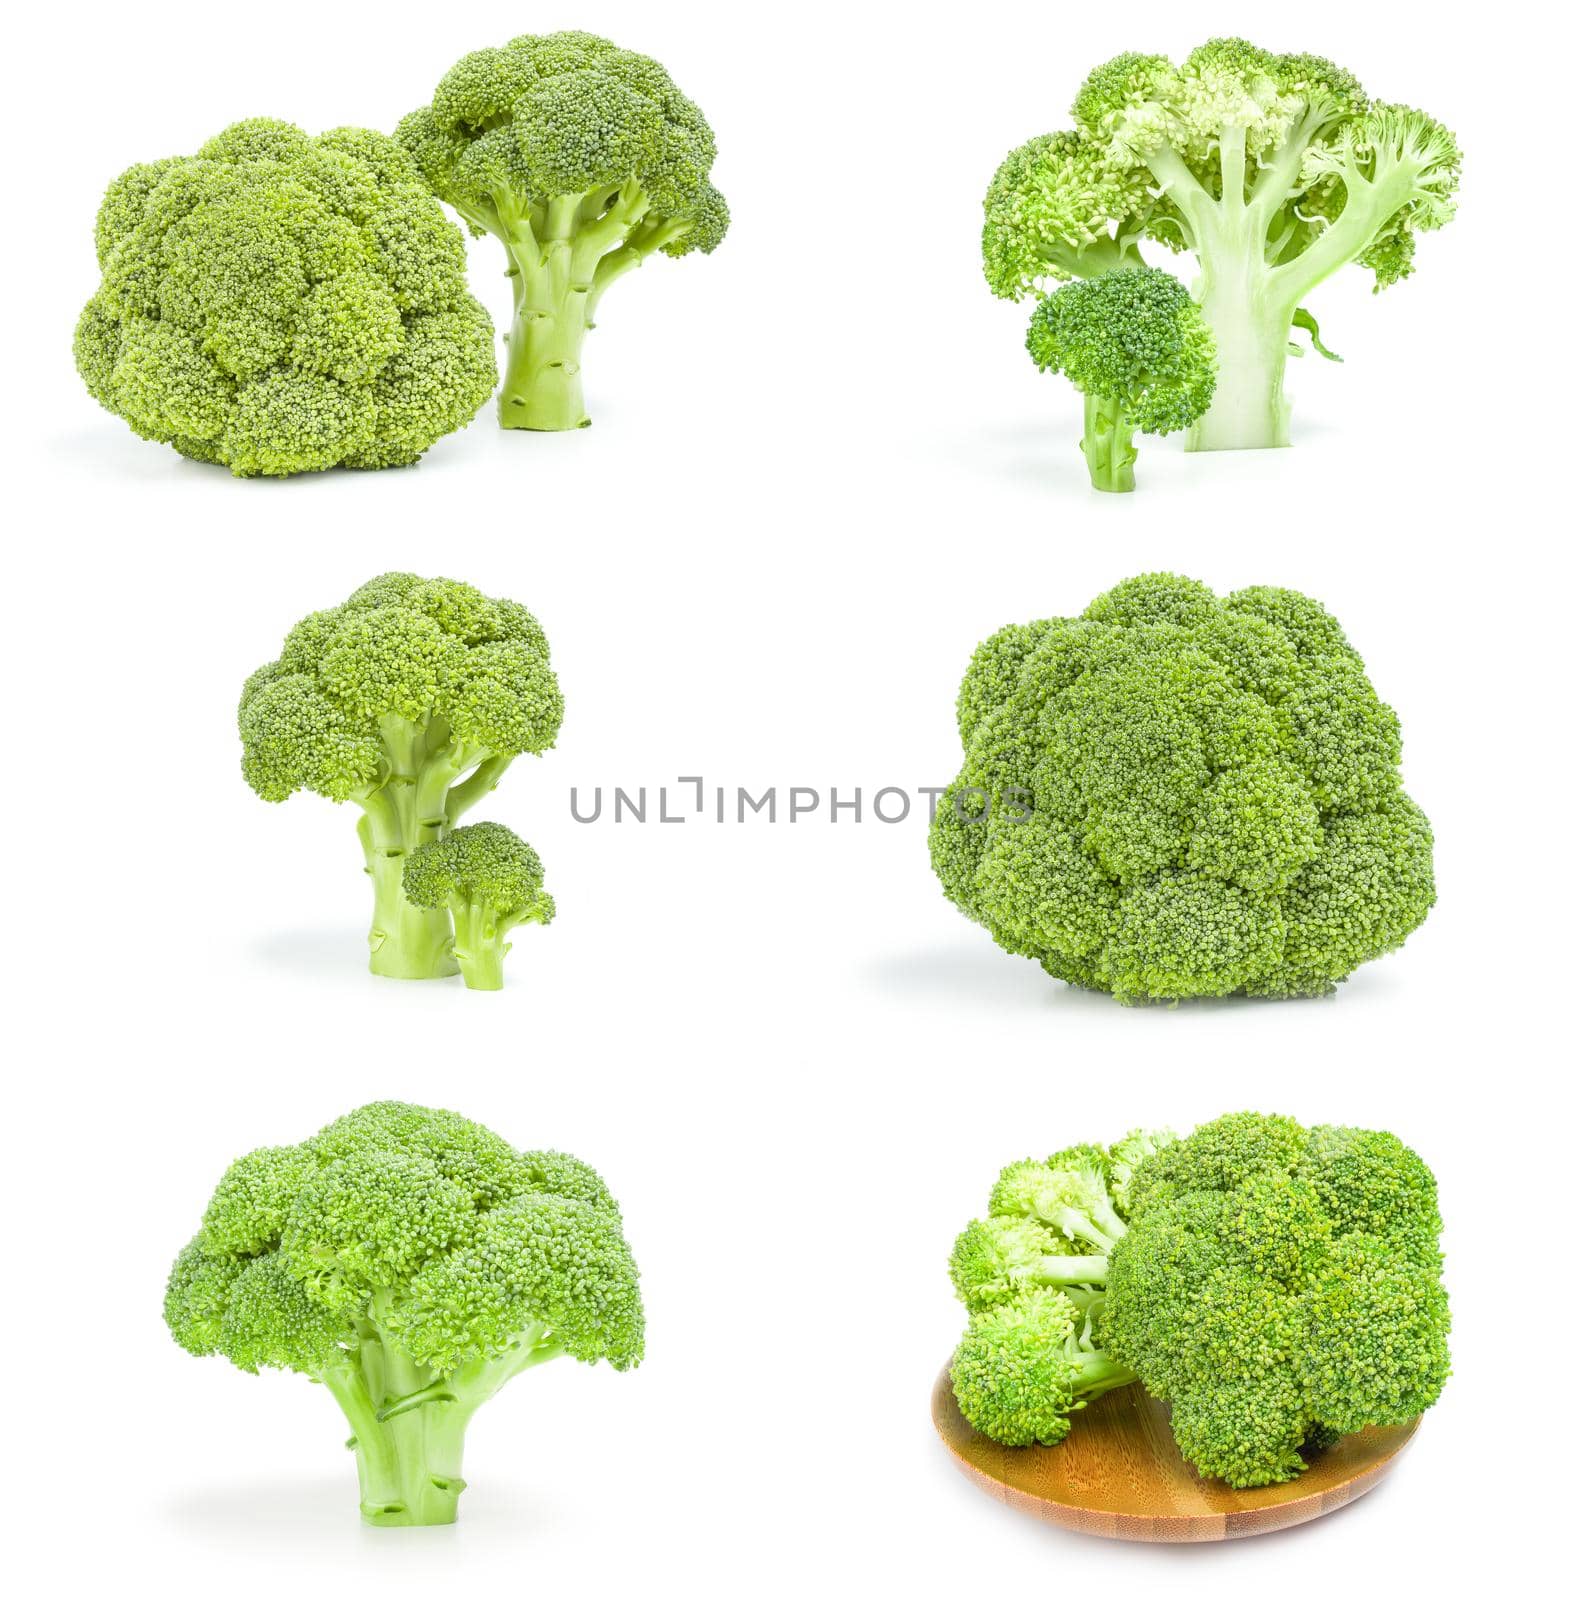 Collage of broccoli cabbage isolated over a white background